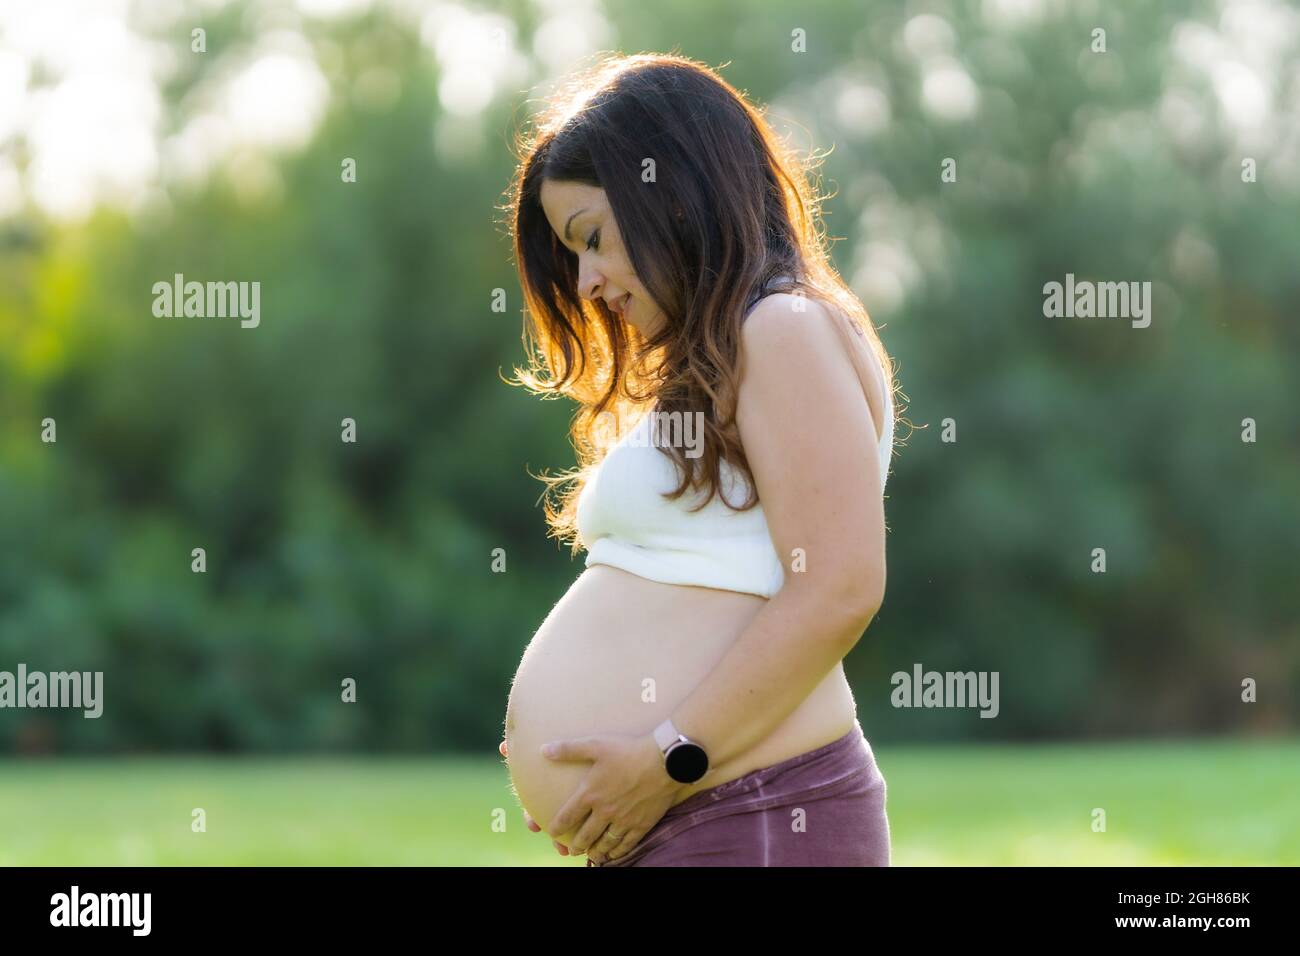 Pregnant woman touching her abdomen in a park with the sunlight shining on her Stock Photo